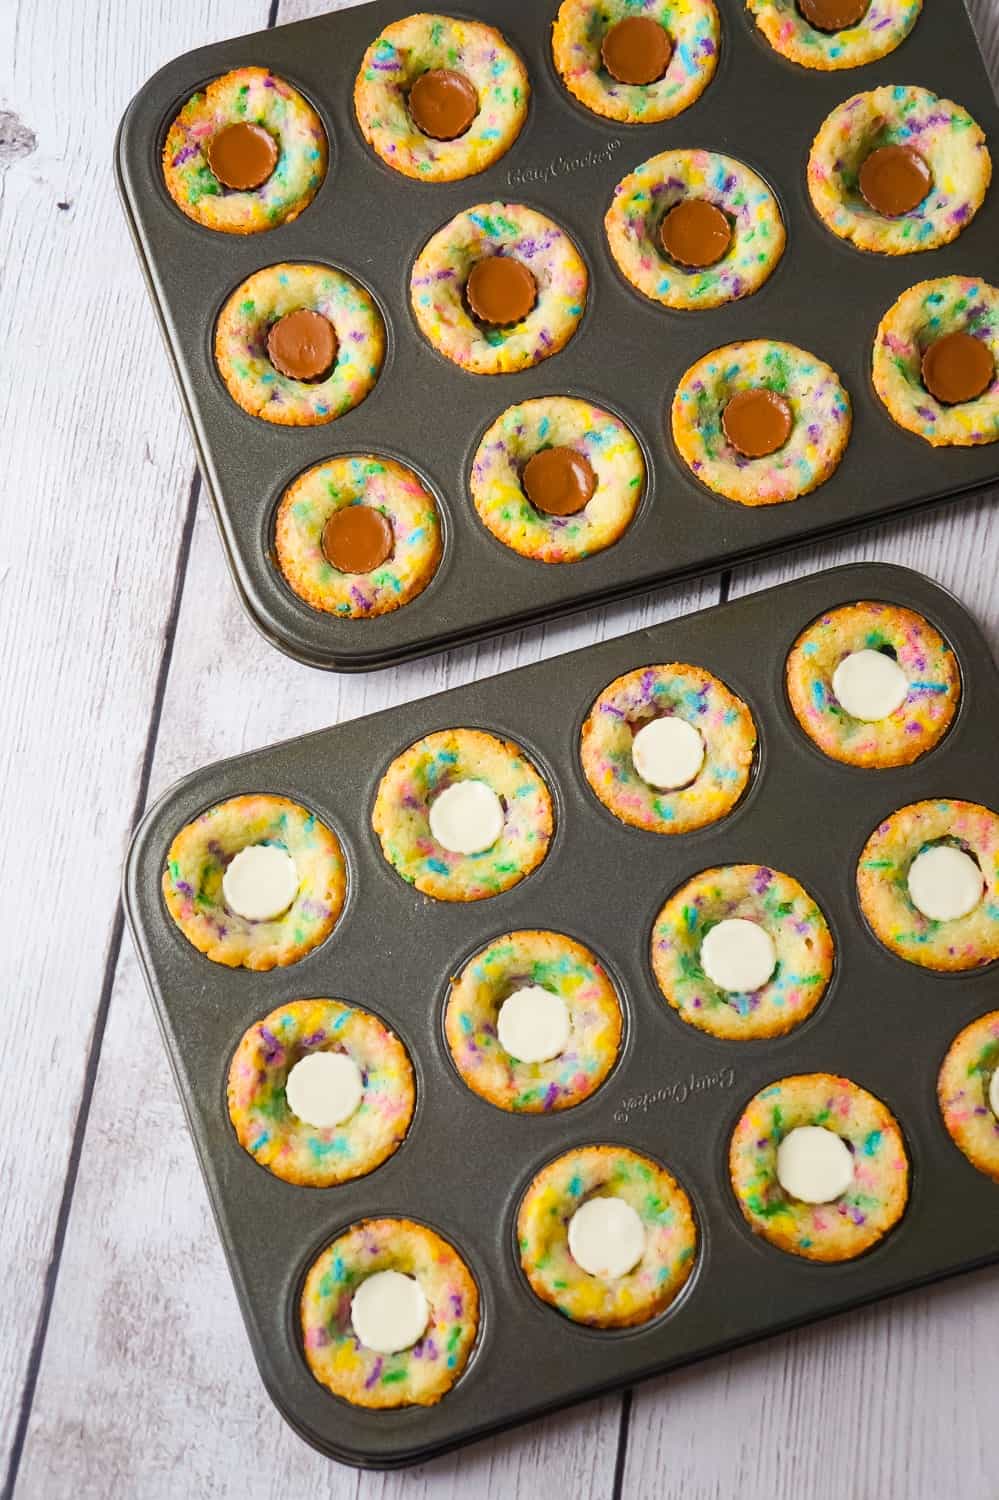 Peanut Butter Cup Sugar Cookies are a cute and colourful dessert perfect for spring. These sugar cookie cups are made in mini muffin tins and contain mini Reese's peanut butter cups and white chocolate peanut butter cups.